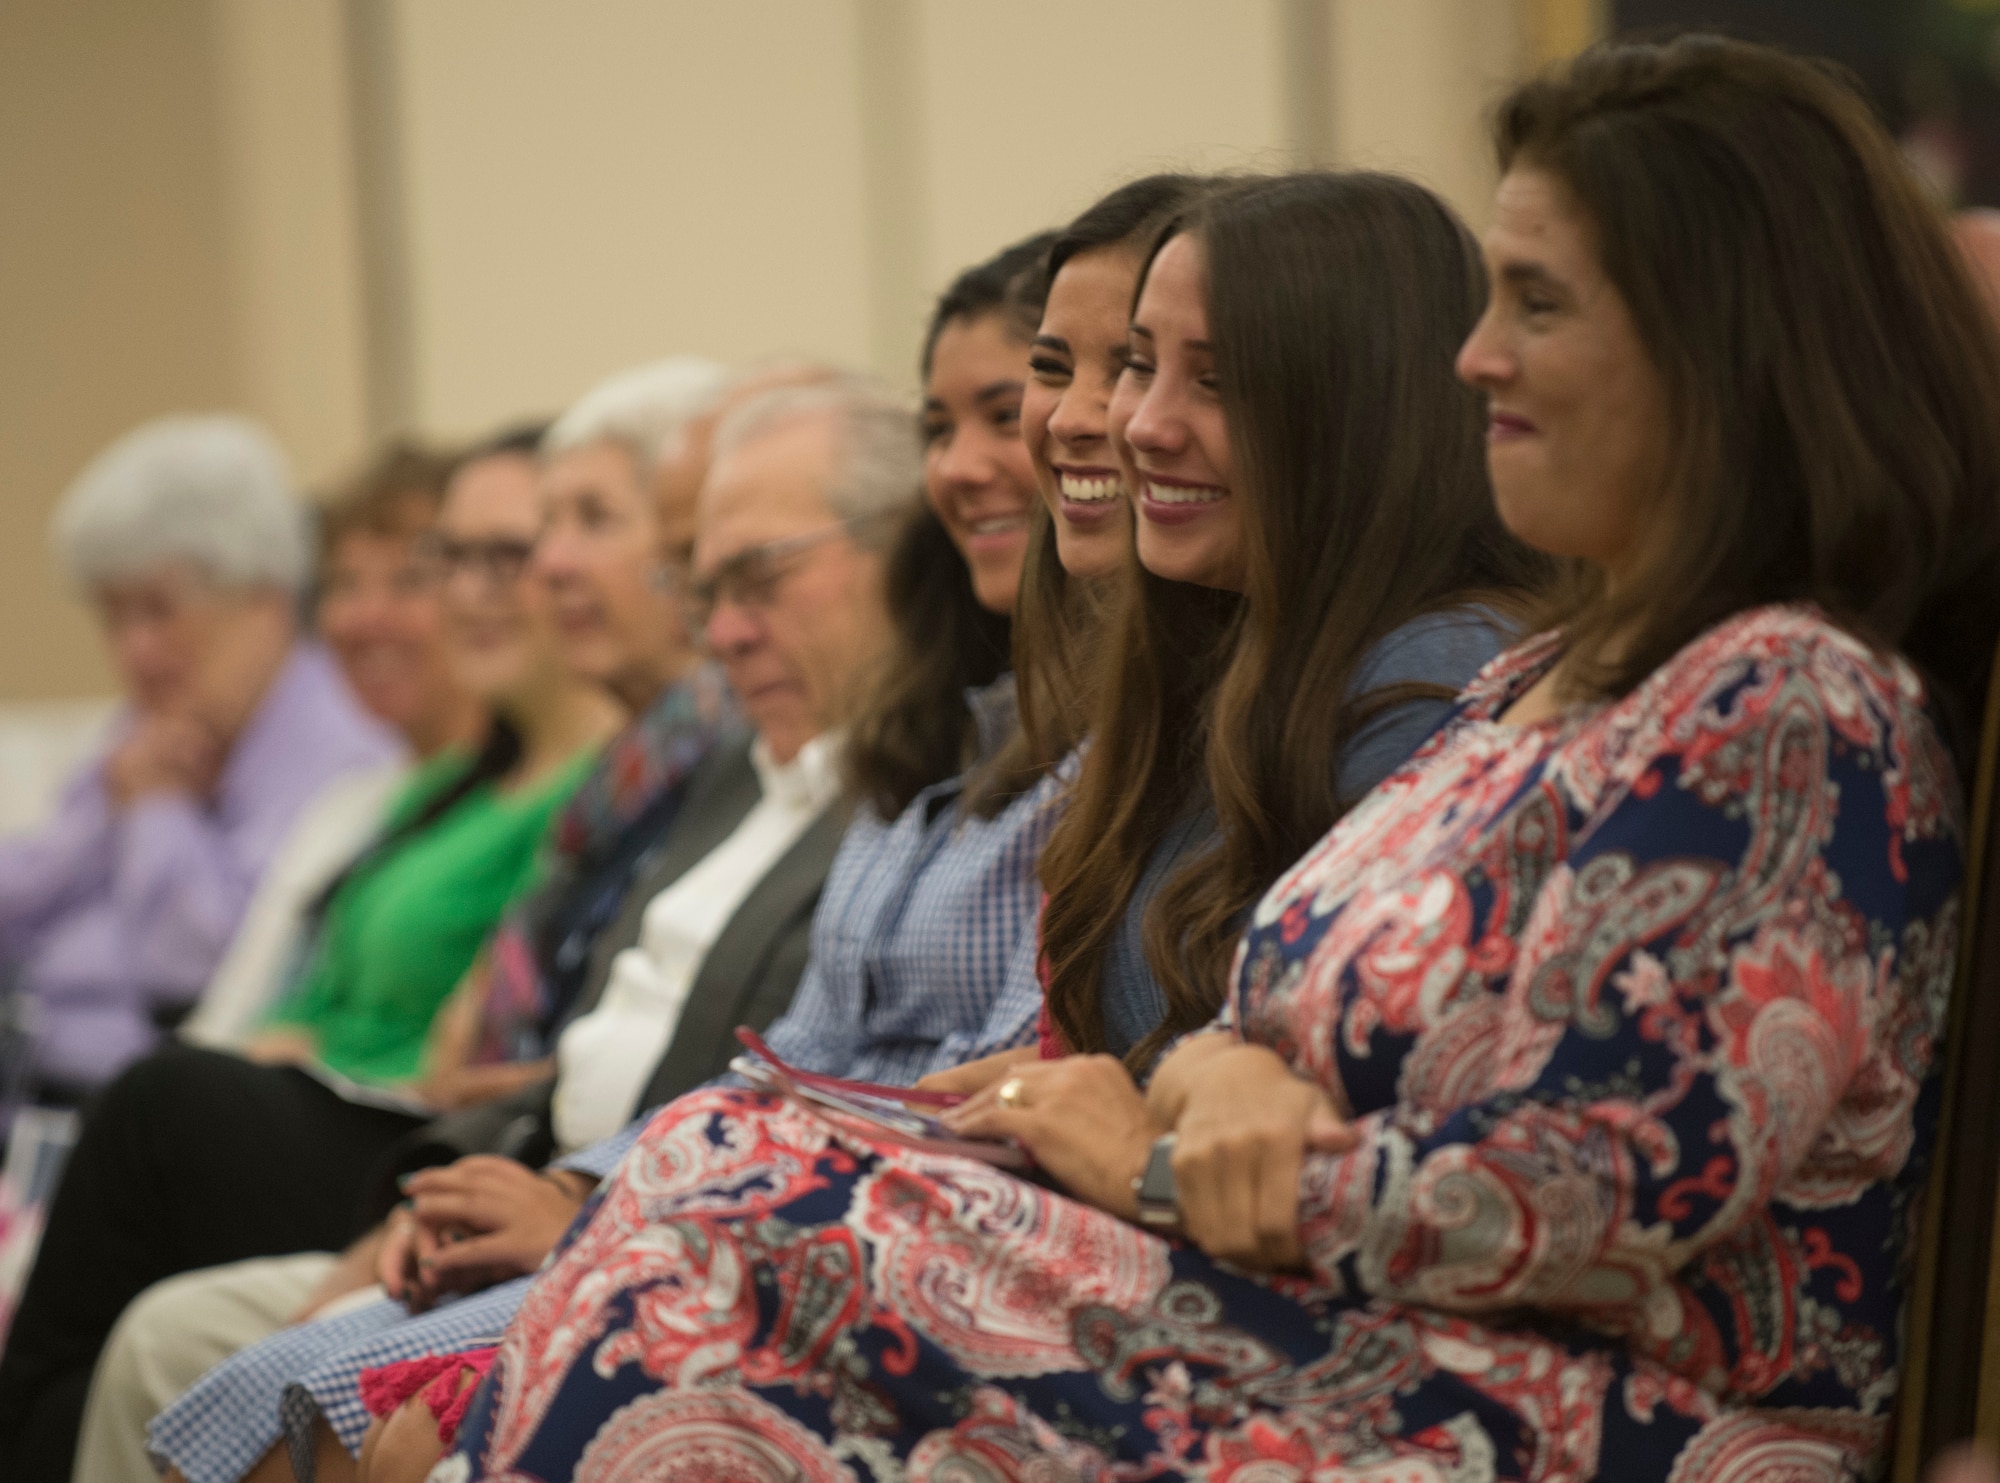 Brig. Gen. Mitchel Butikofer’s, Air Forces Cyber vice commander, family share laughs during Butikofer’s retirement ceremony at Joint Base San Antonio-Lackland, Texas, June 1, 2018. Butikofer retired after 29 years of service. (U.S. Air Force photo by Tech. Sgt. R.J. Biermann)